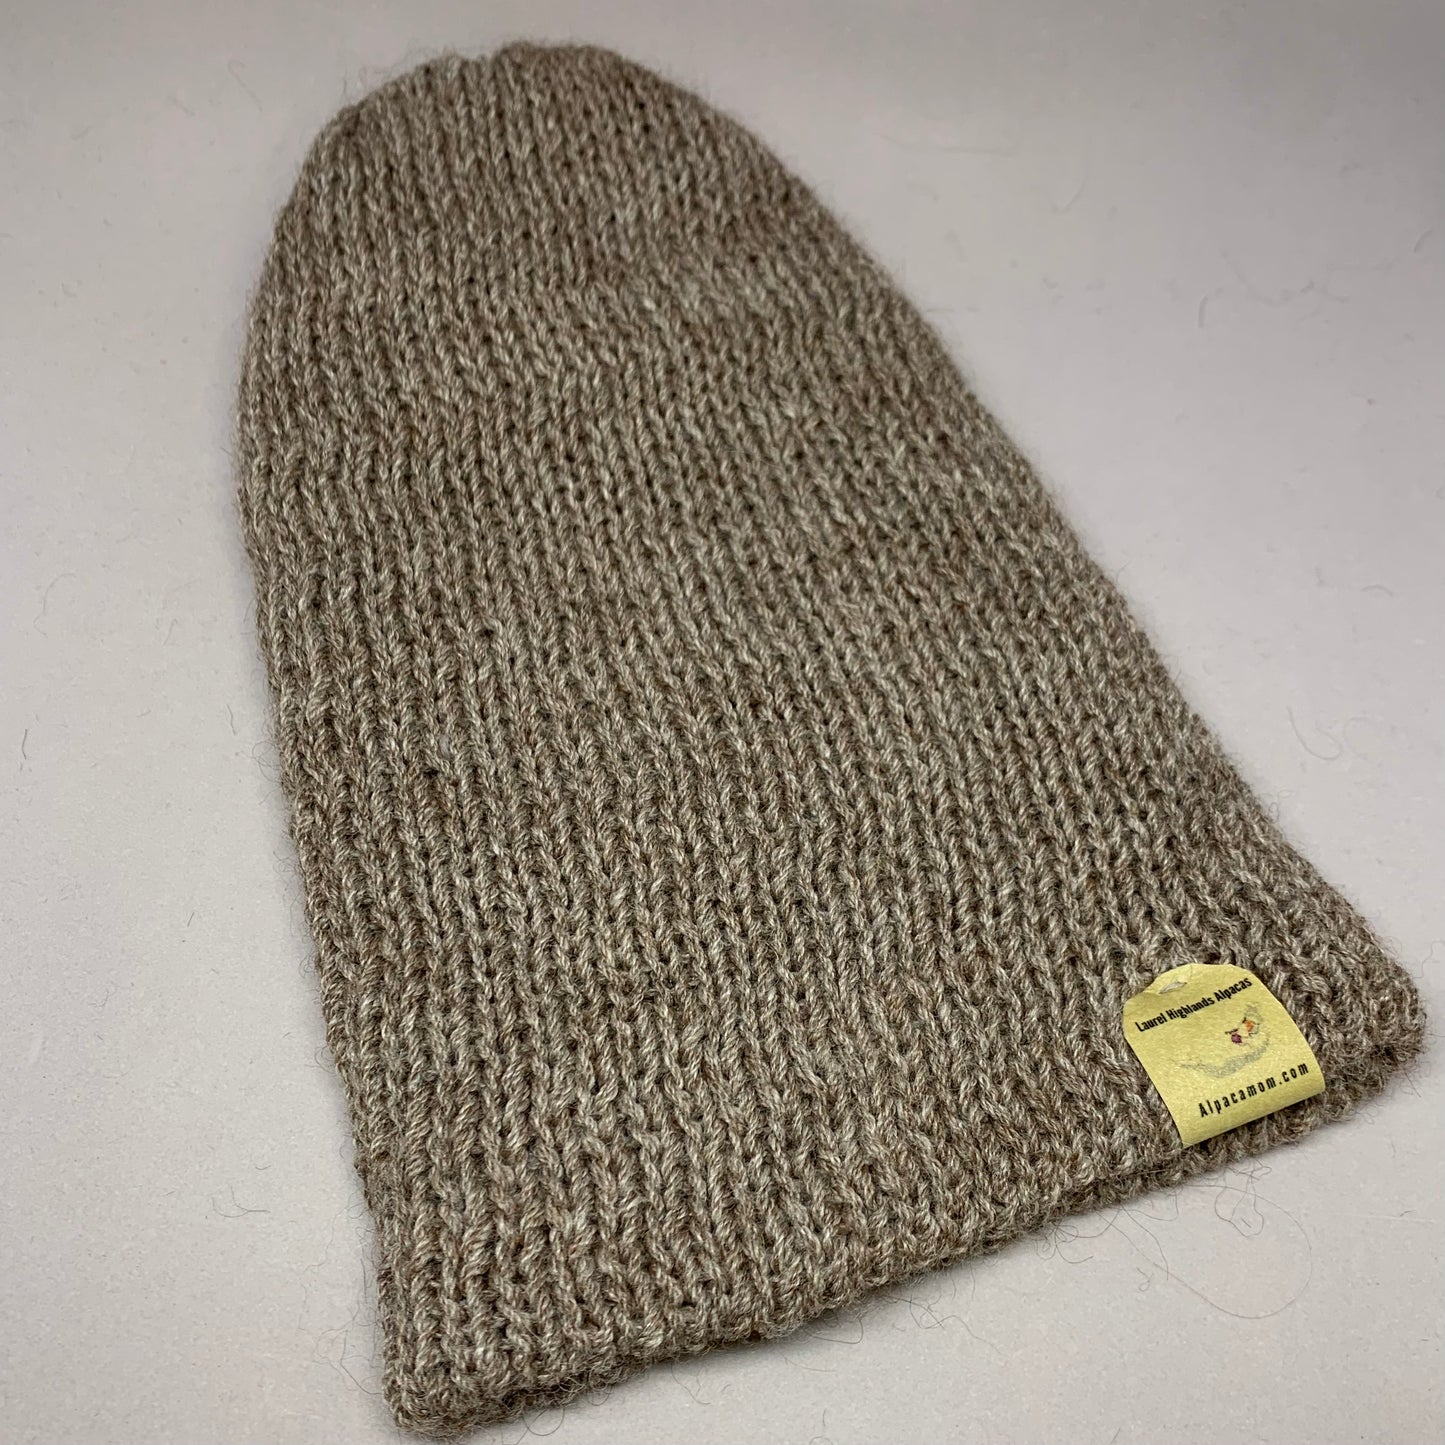 Taupe Knittted Alpaca Beanie Hat